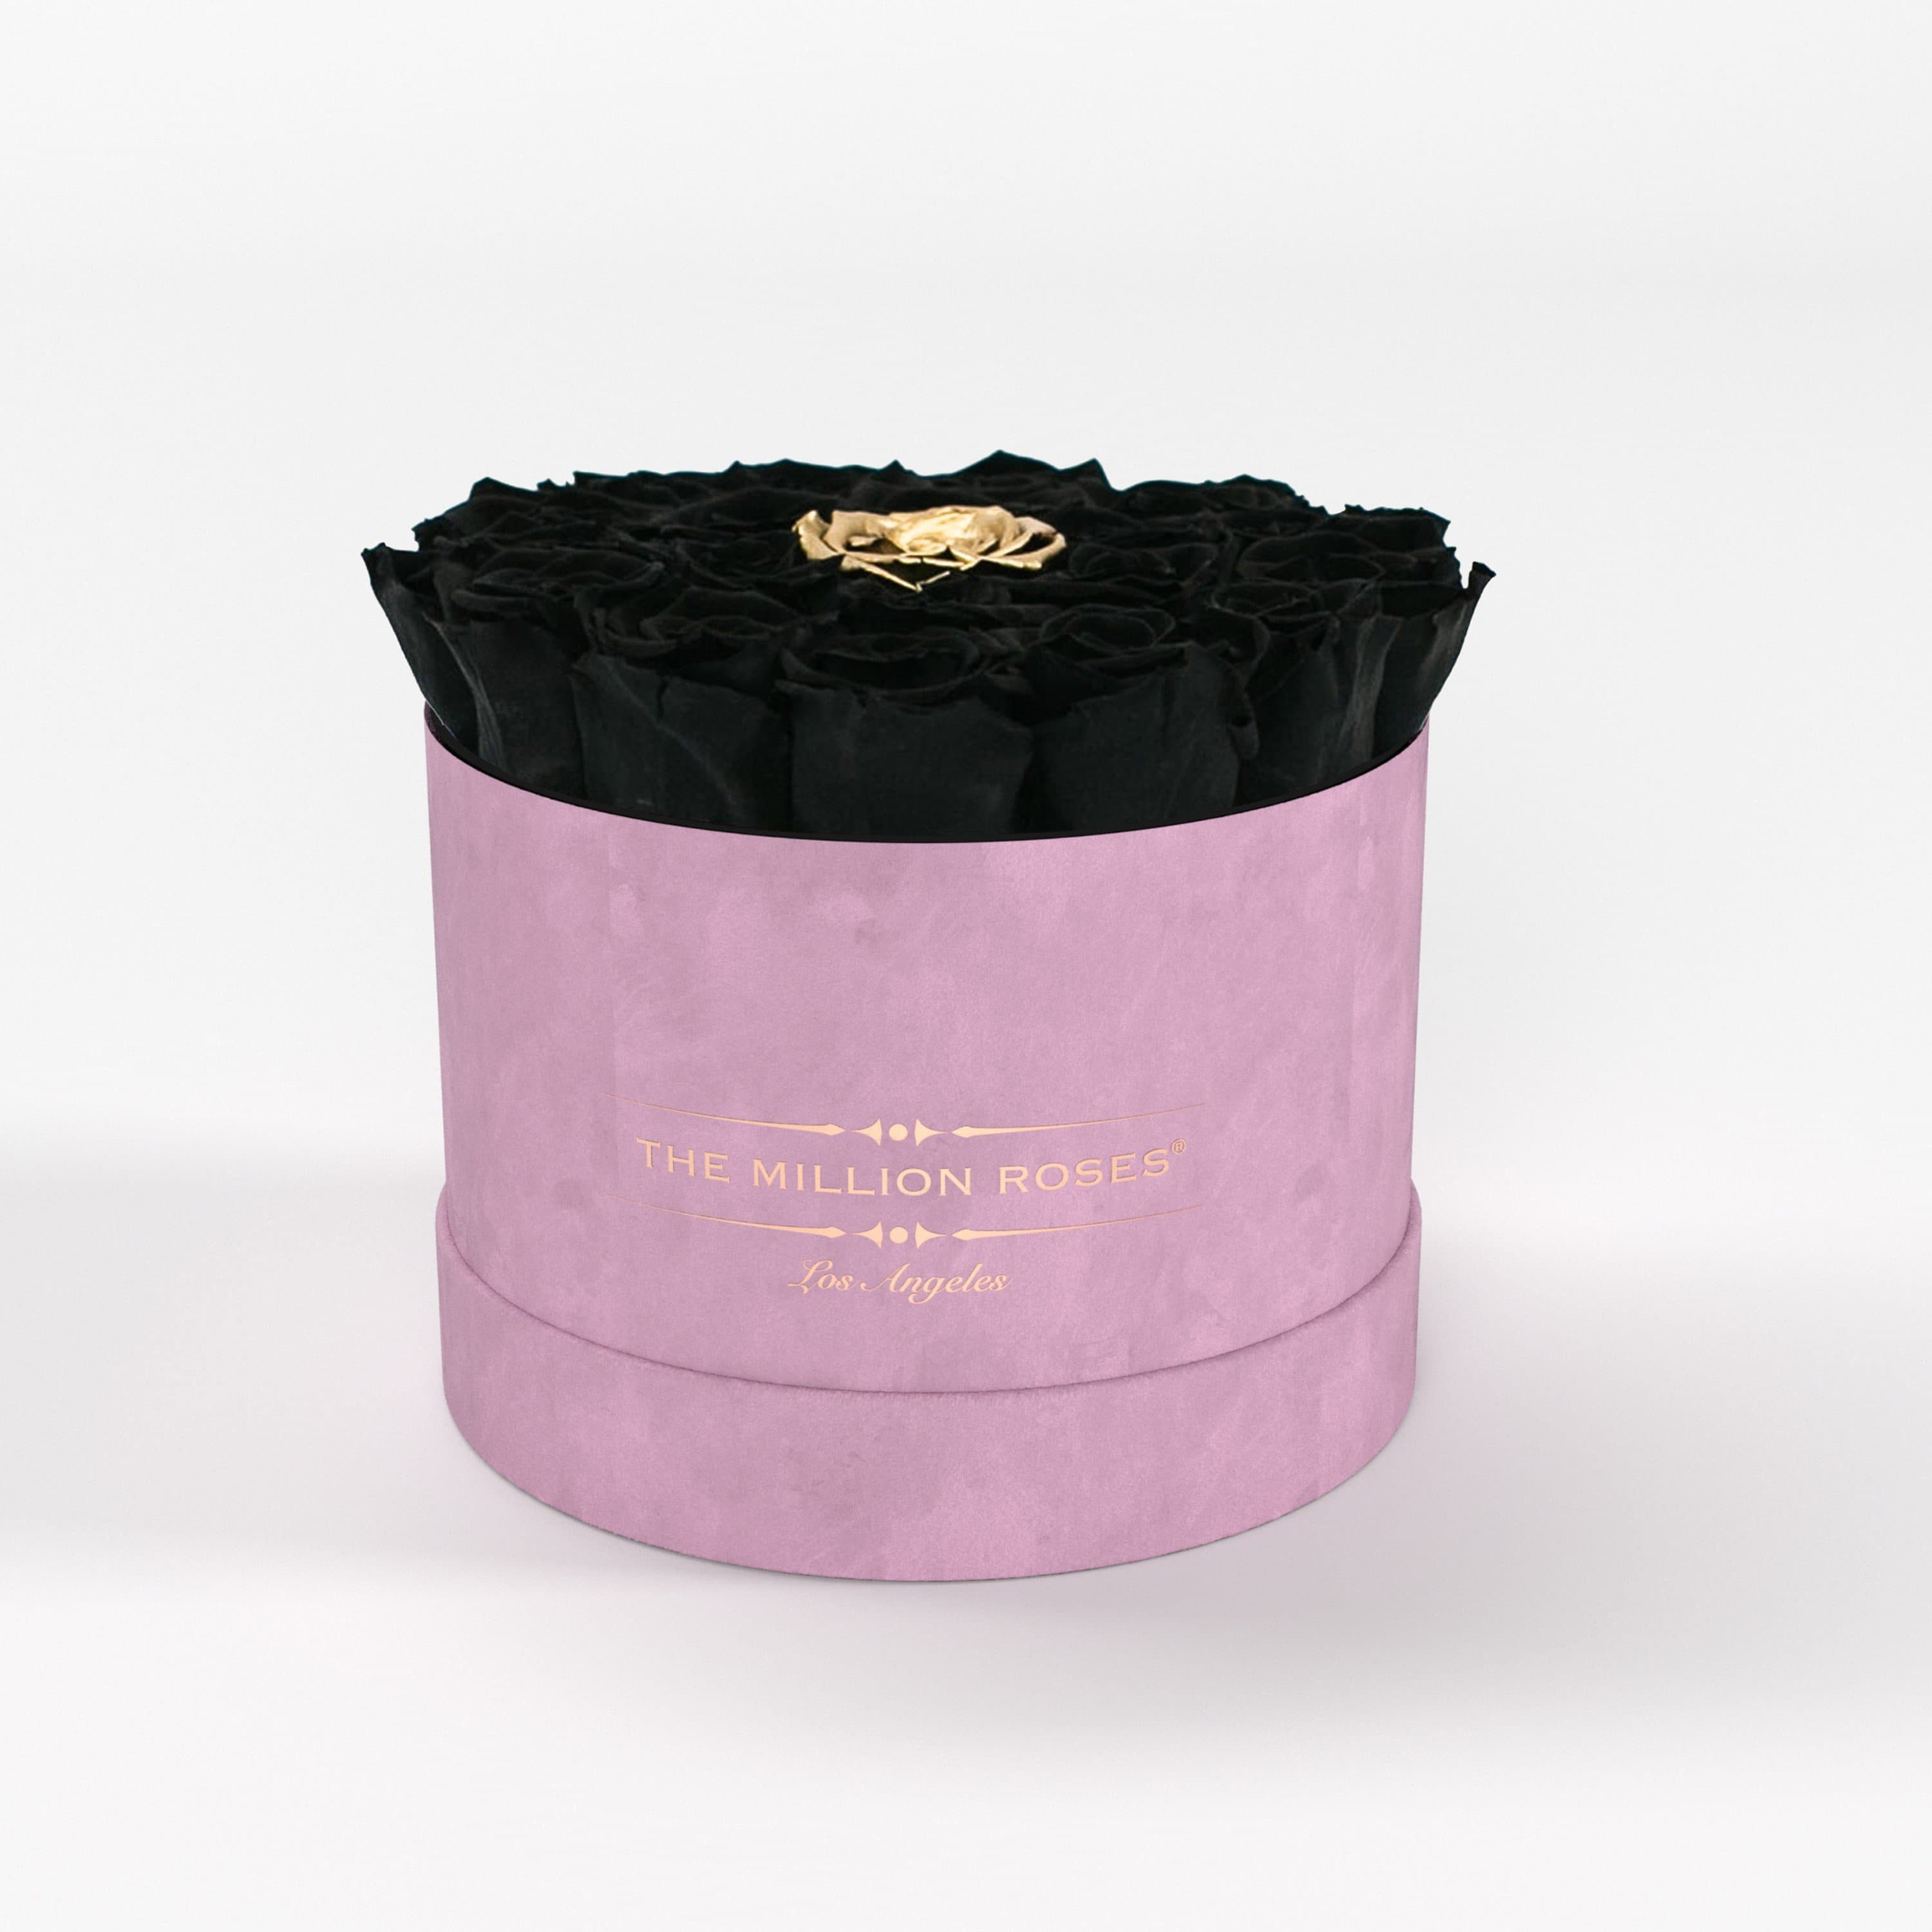 Classic Light Pink Suede Box | All Colors - The Million Roses